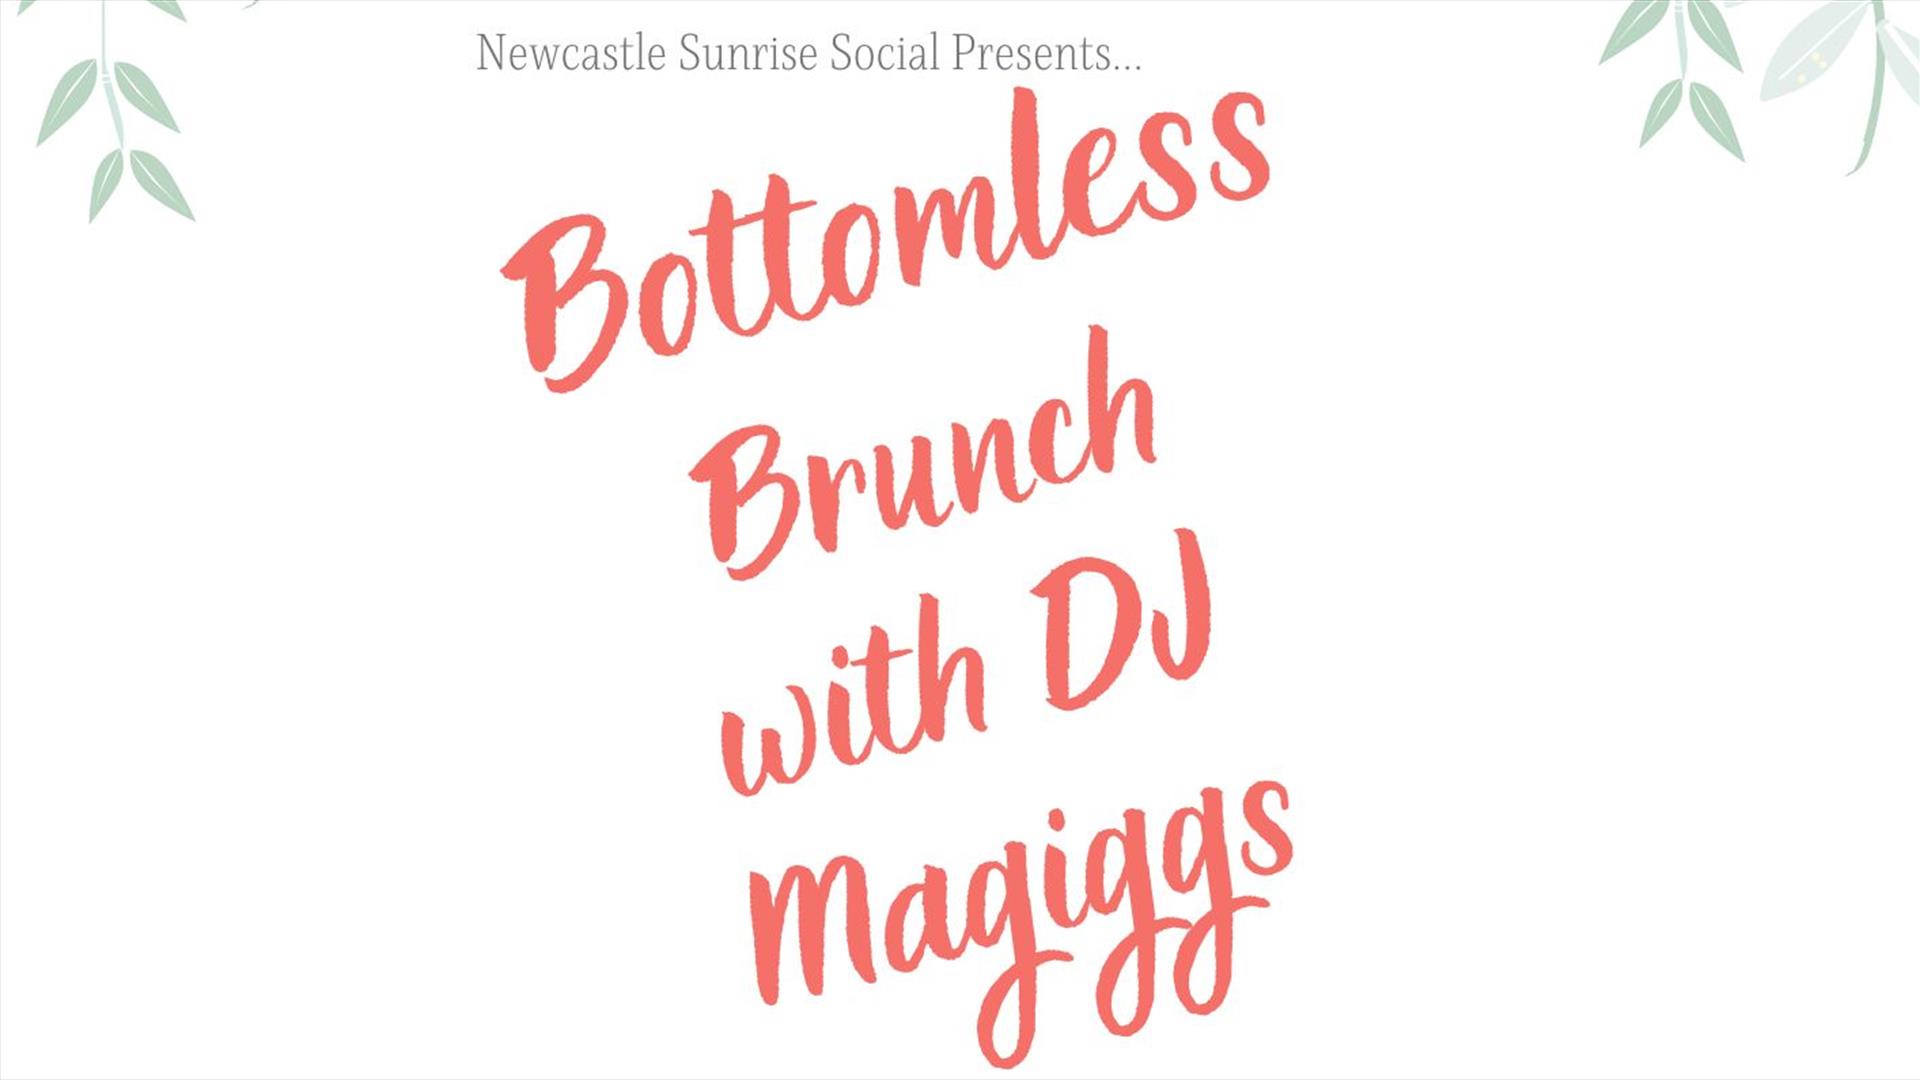 Bottomless Brunch with DJ Magiggs